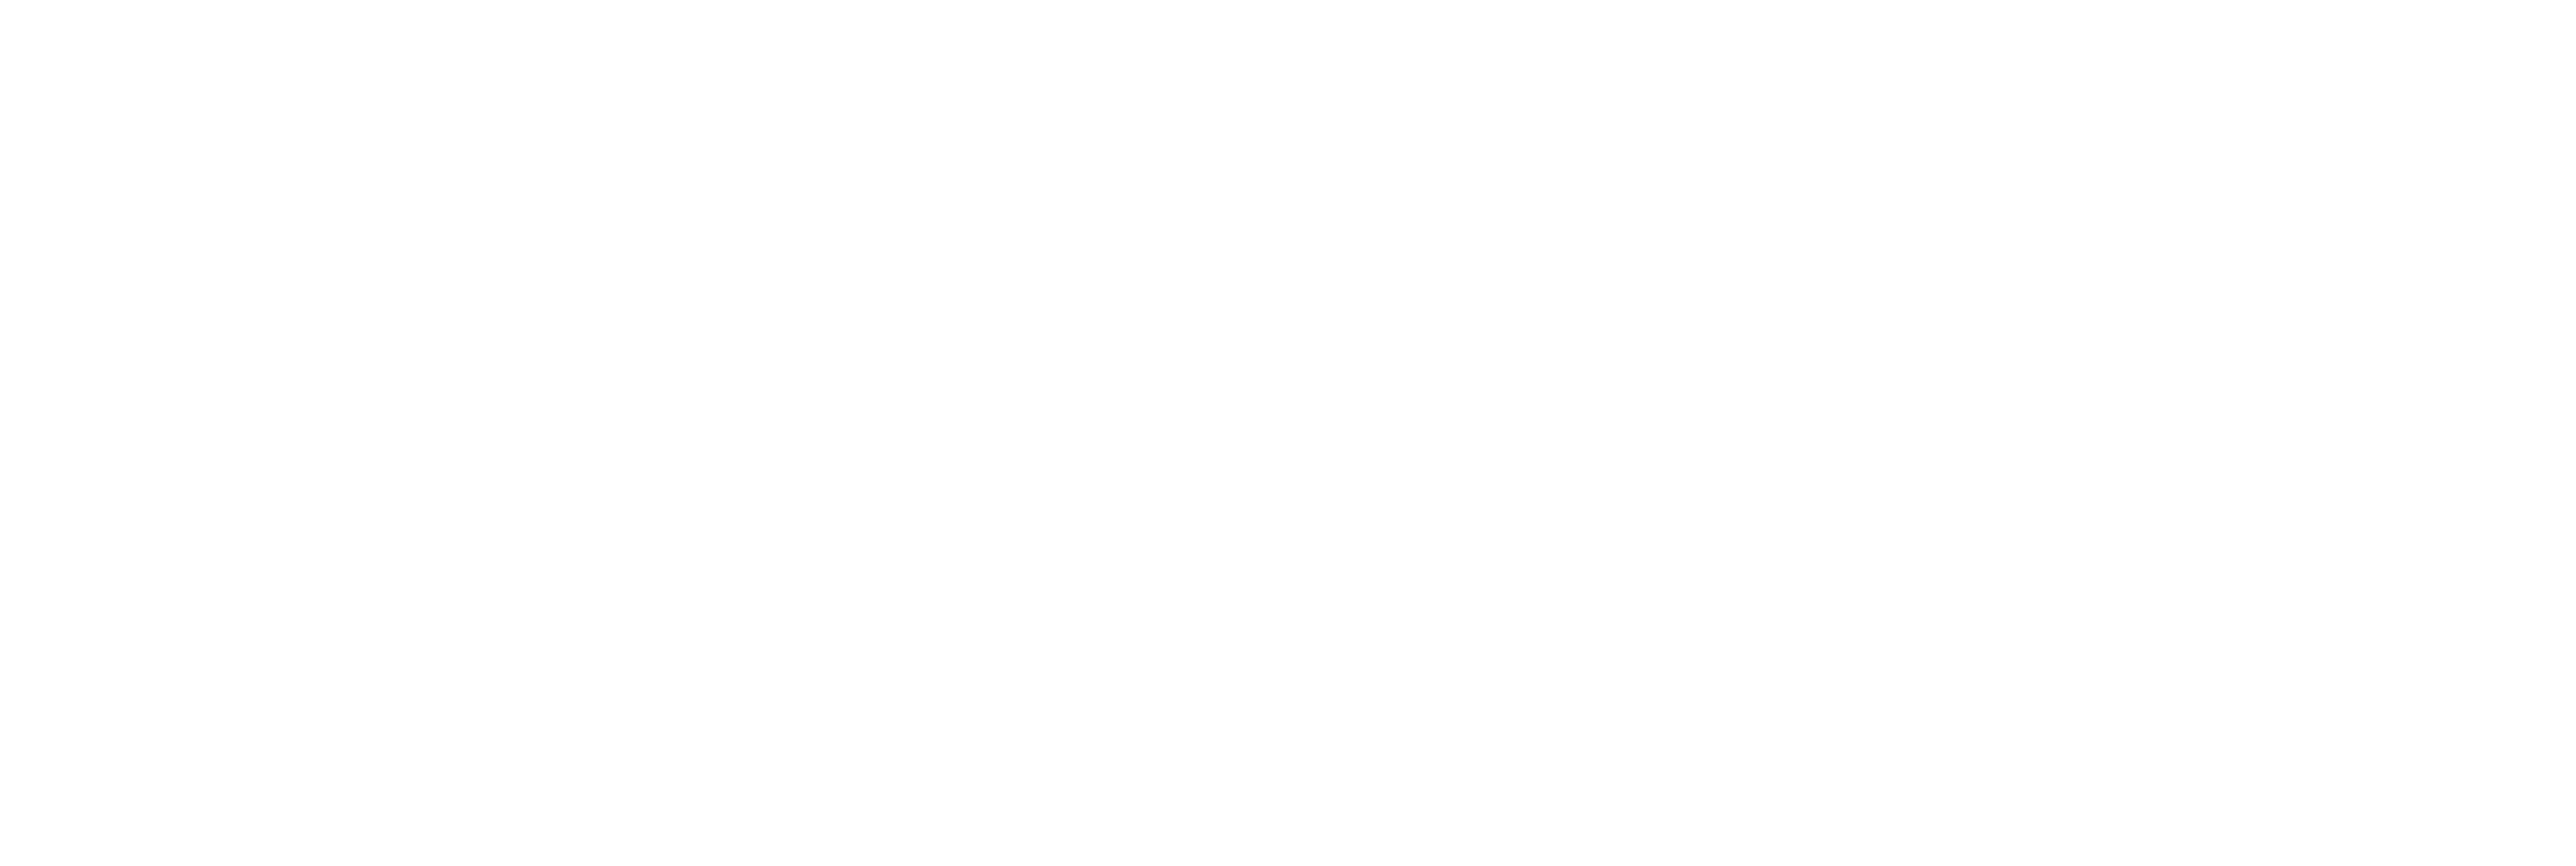 TP Tuned Logo 1 - wit.png